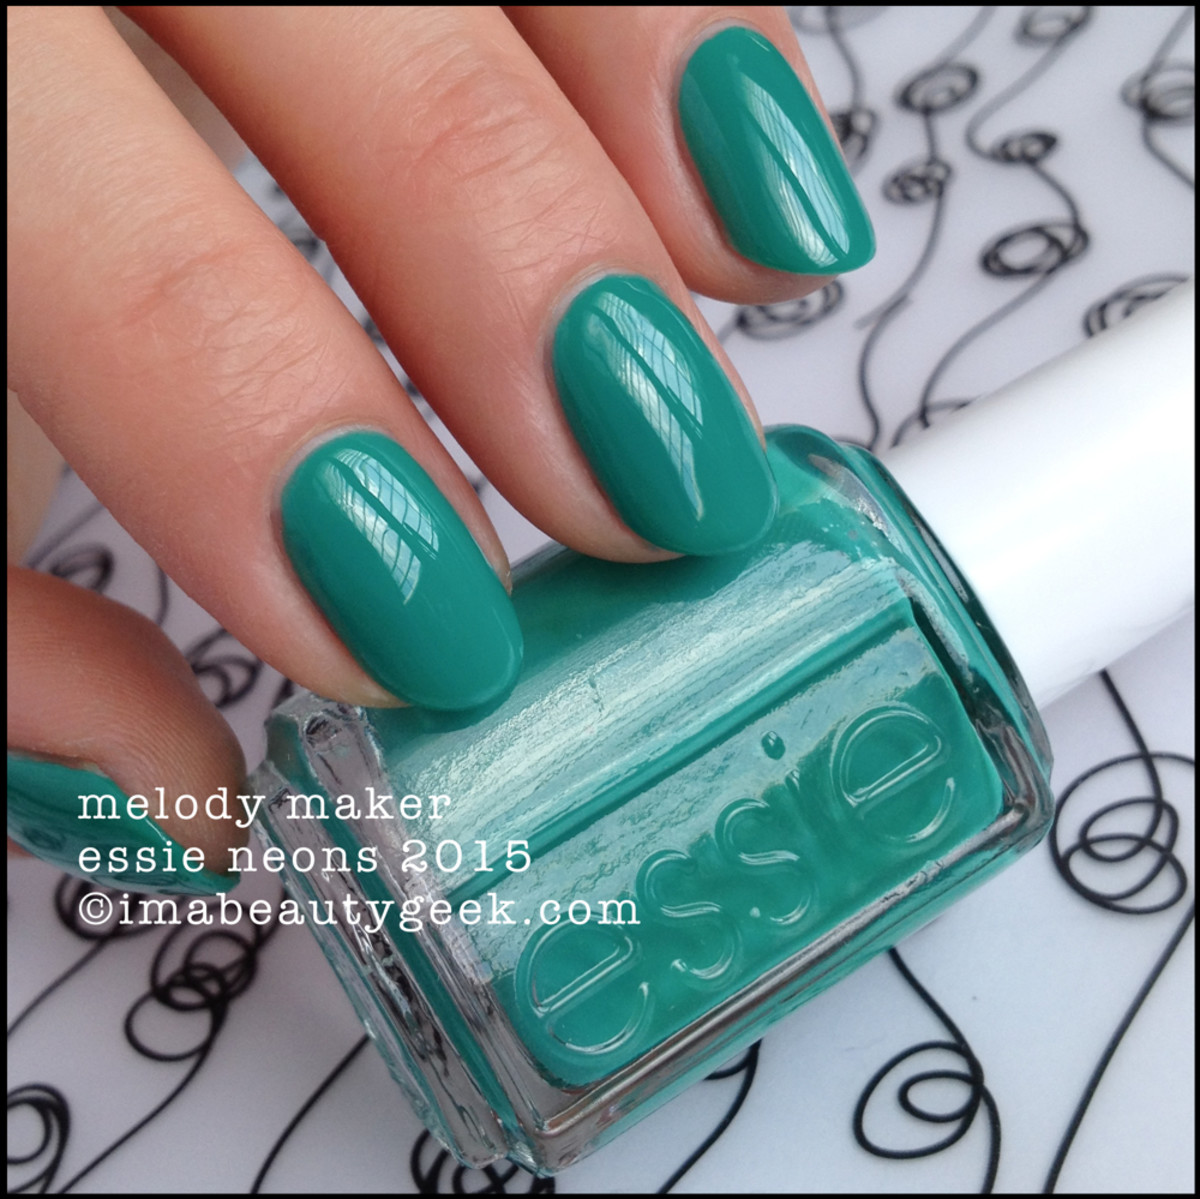 Essie Neons 2015 Melody Maker Neon Collection Swatches